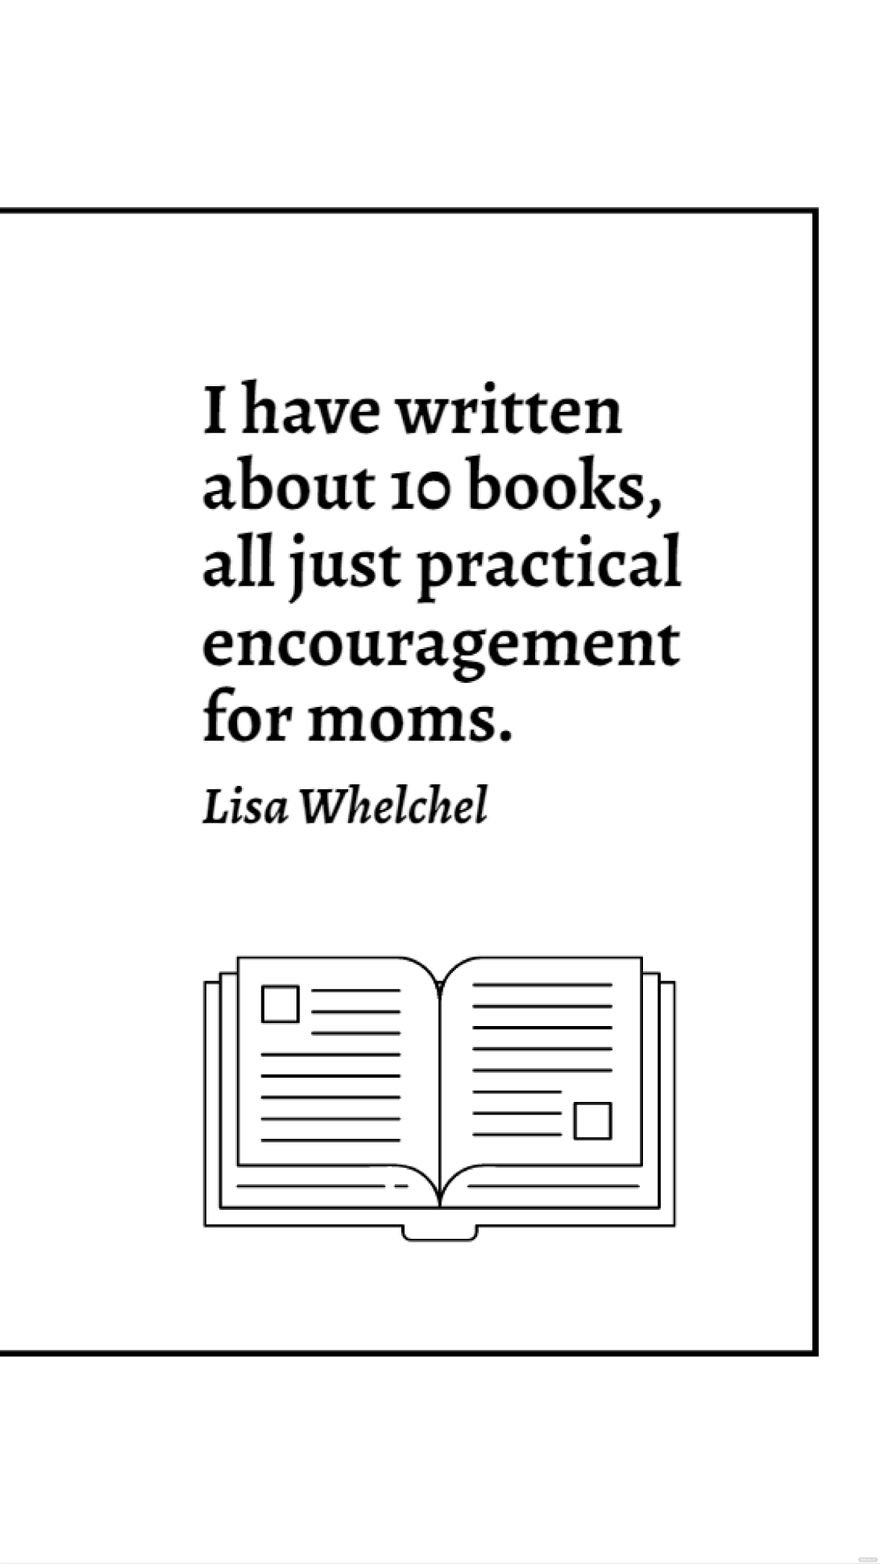 Lisa Whelchel - I have written about 10 books, all just practical encouragement for moms.